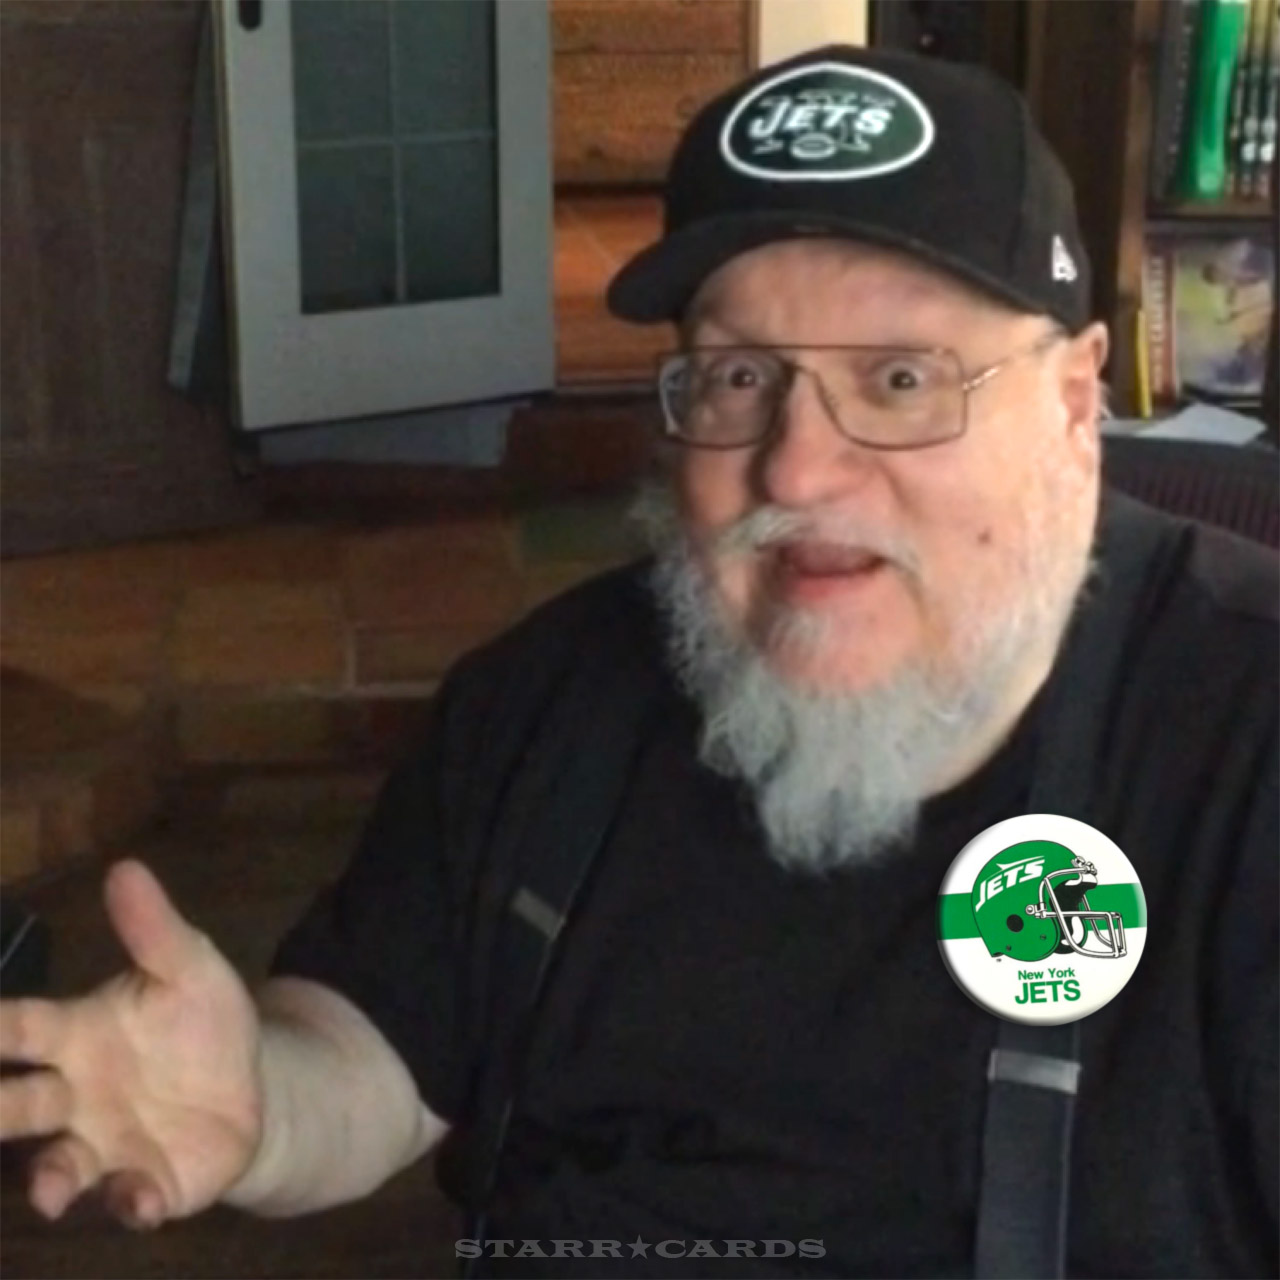 'Game of Thrones' creator George RR Martin loves his New York Jets